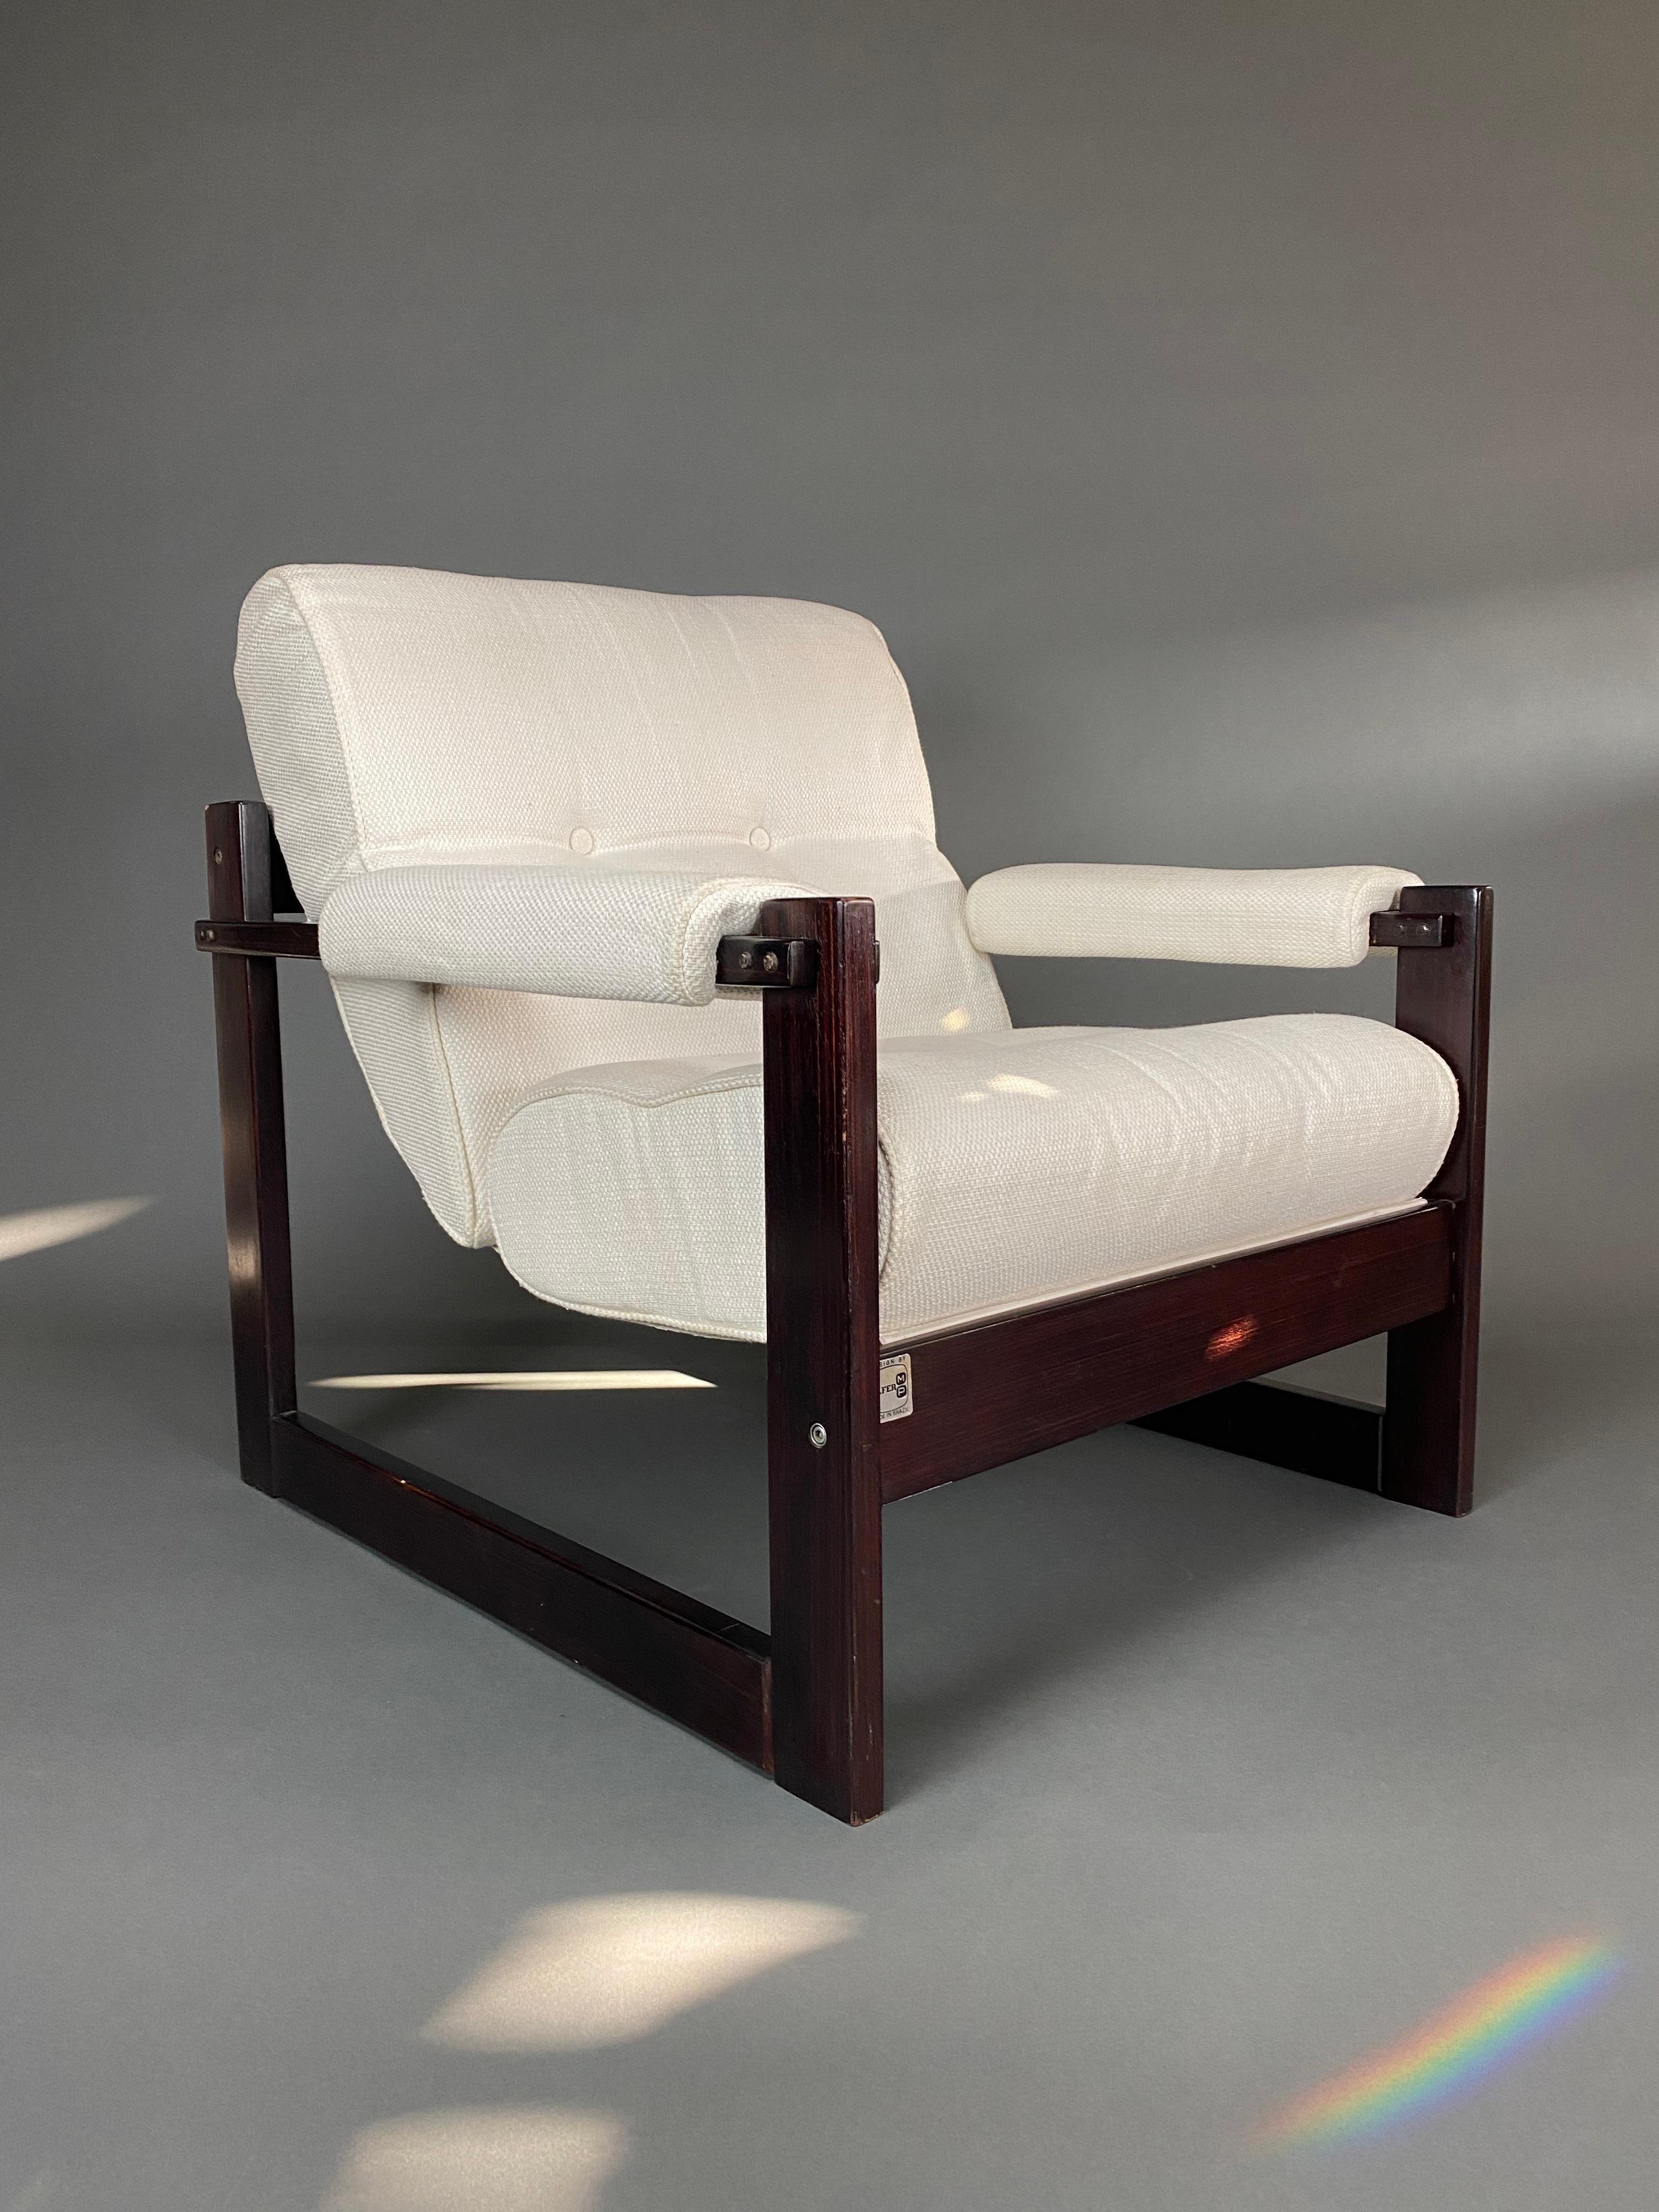 Gorgeous Mid-Century Modern pair of white upholstery and Brazilian Jatoba wood lounge chairs made in São Paulo by Percival Lafer. Both very comfortable chairs are in great condition as can be seen in the images.
This beauty will be shipped insured